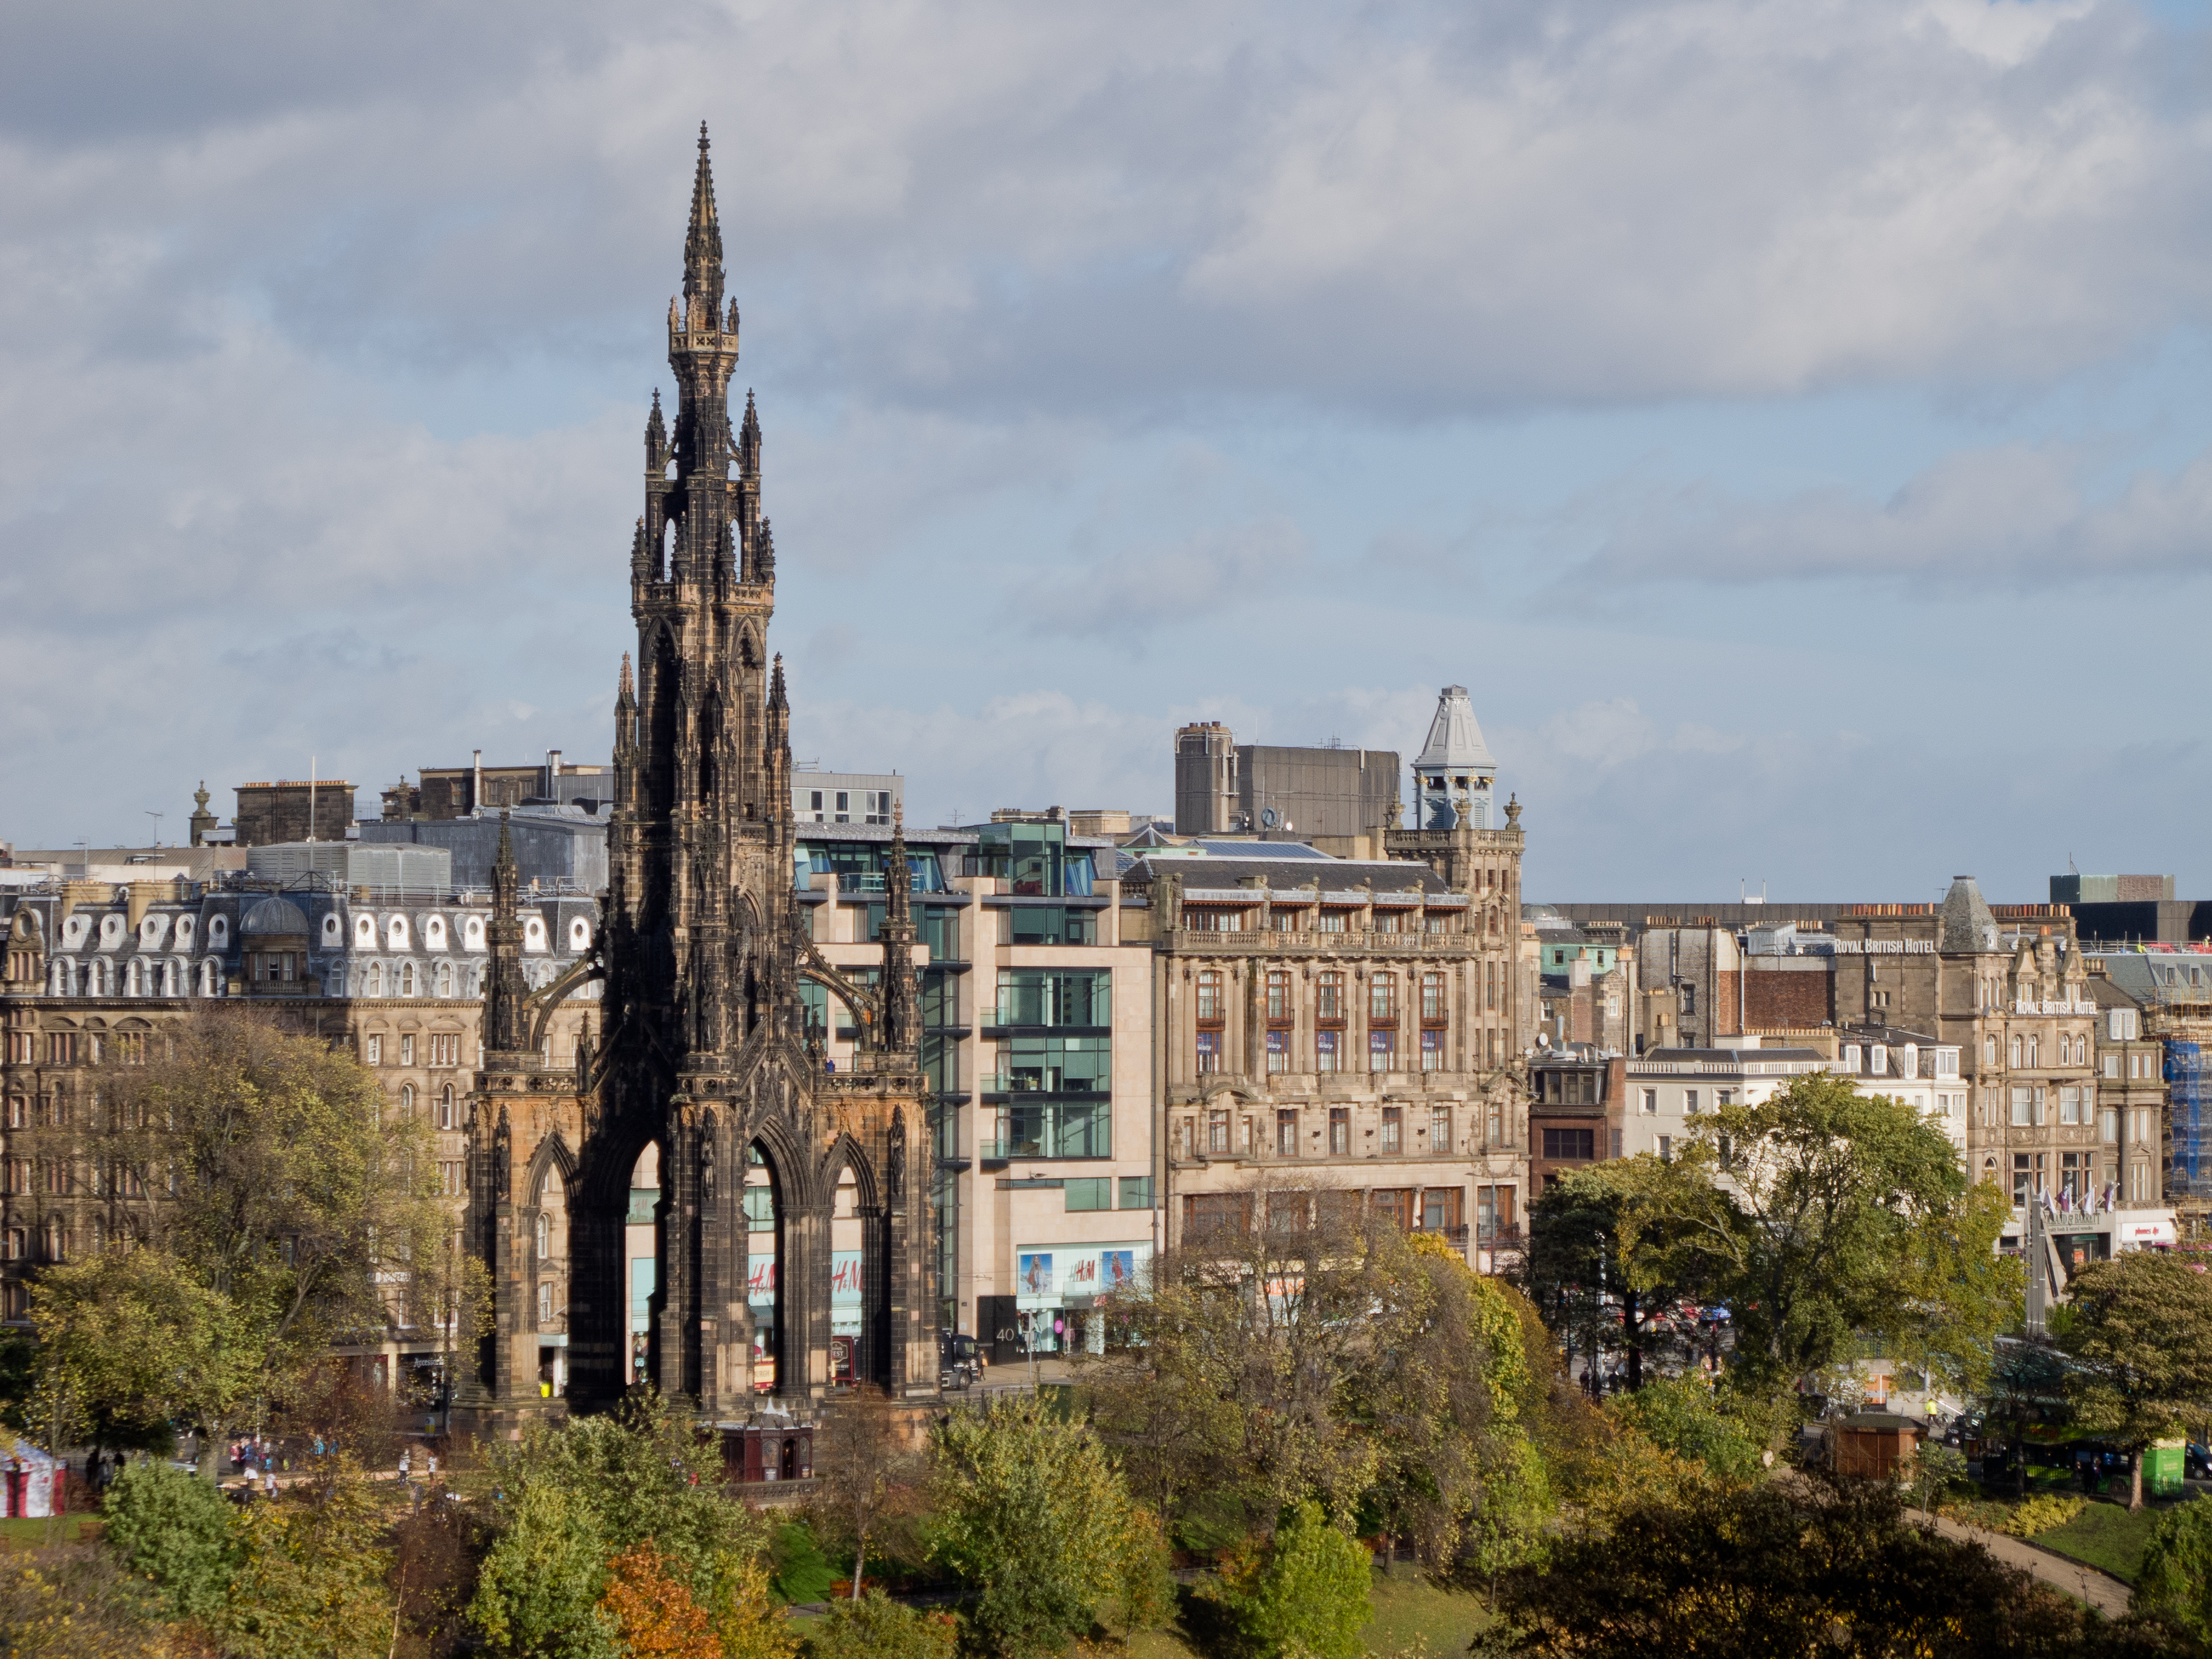 Edinburgh: 5 Instagrammable Spots You Can Visit by Car